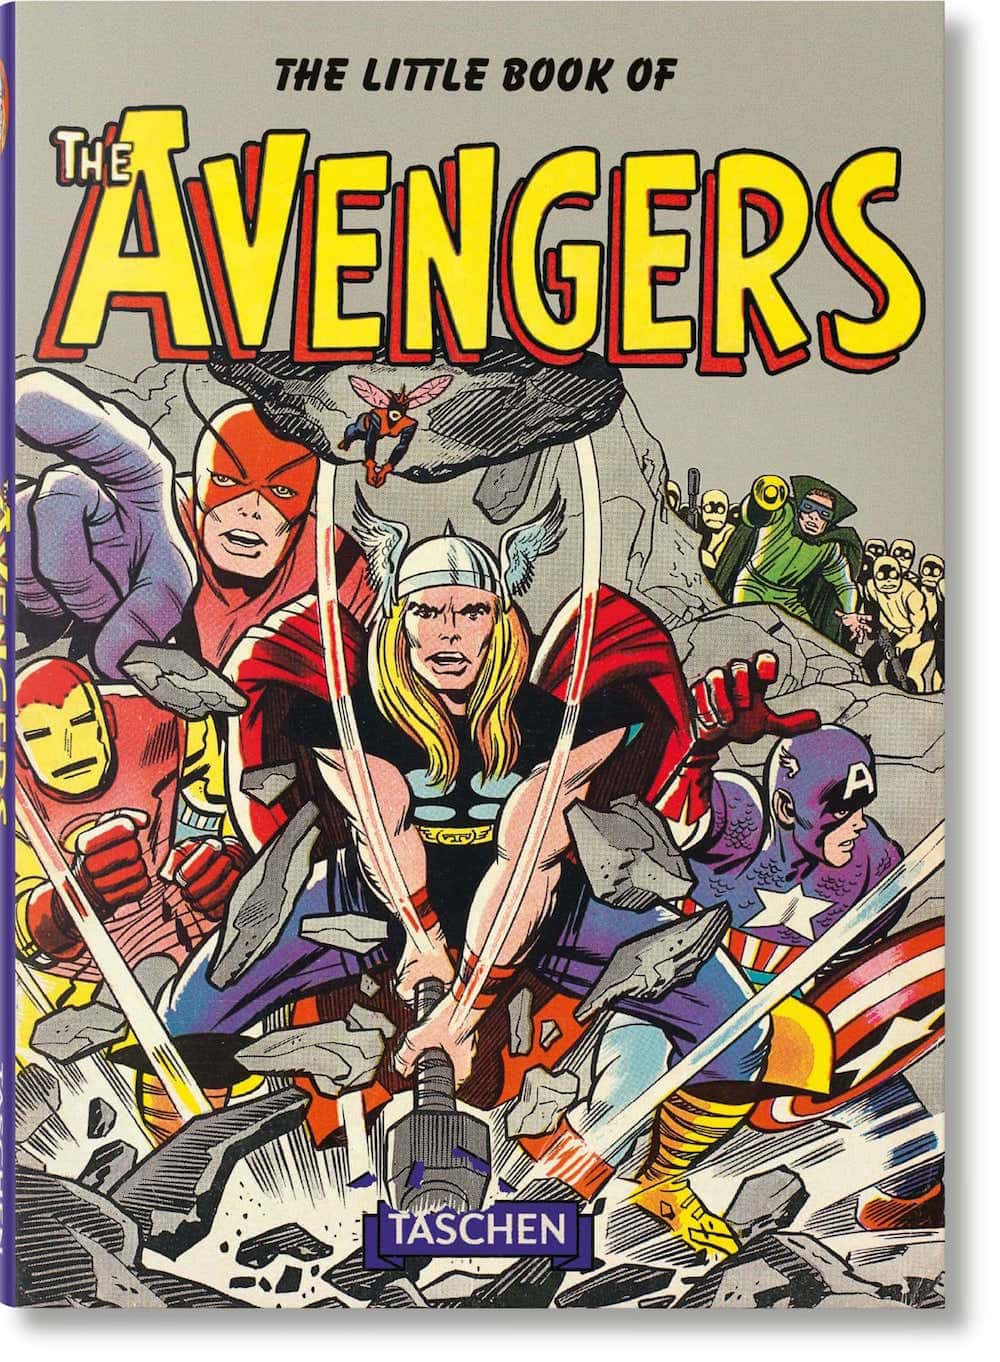 THE LITTLE BOOK OF AVENGERS